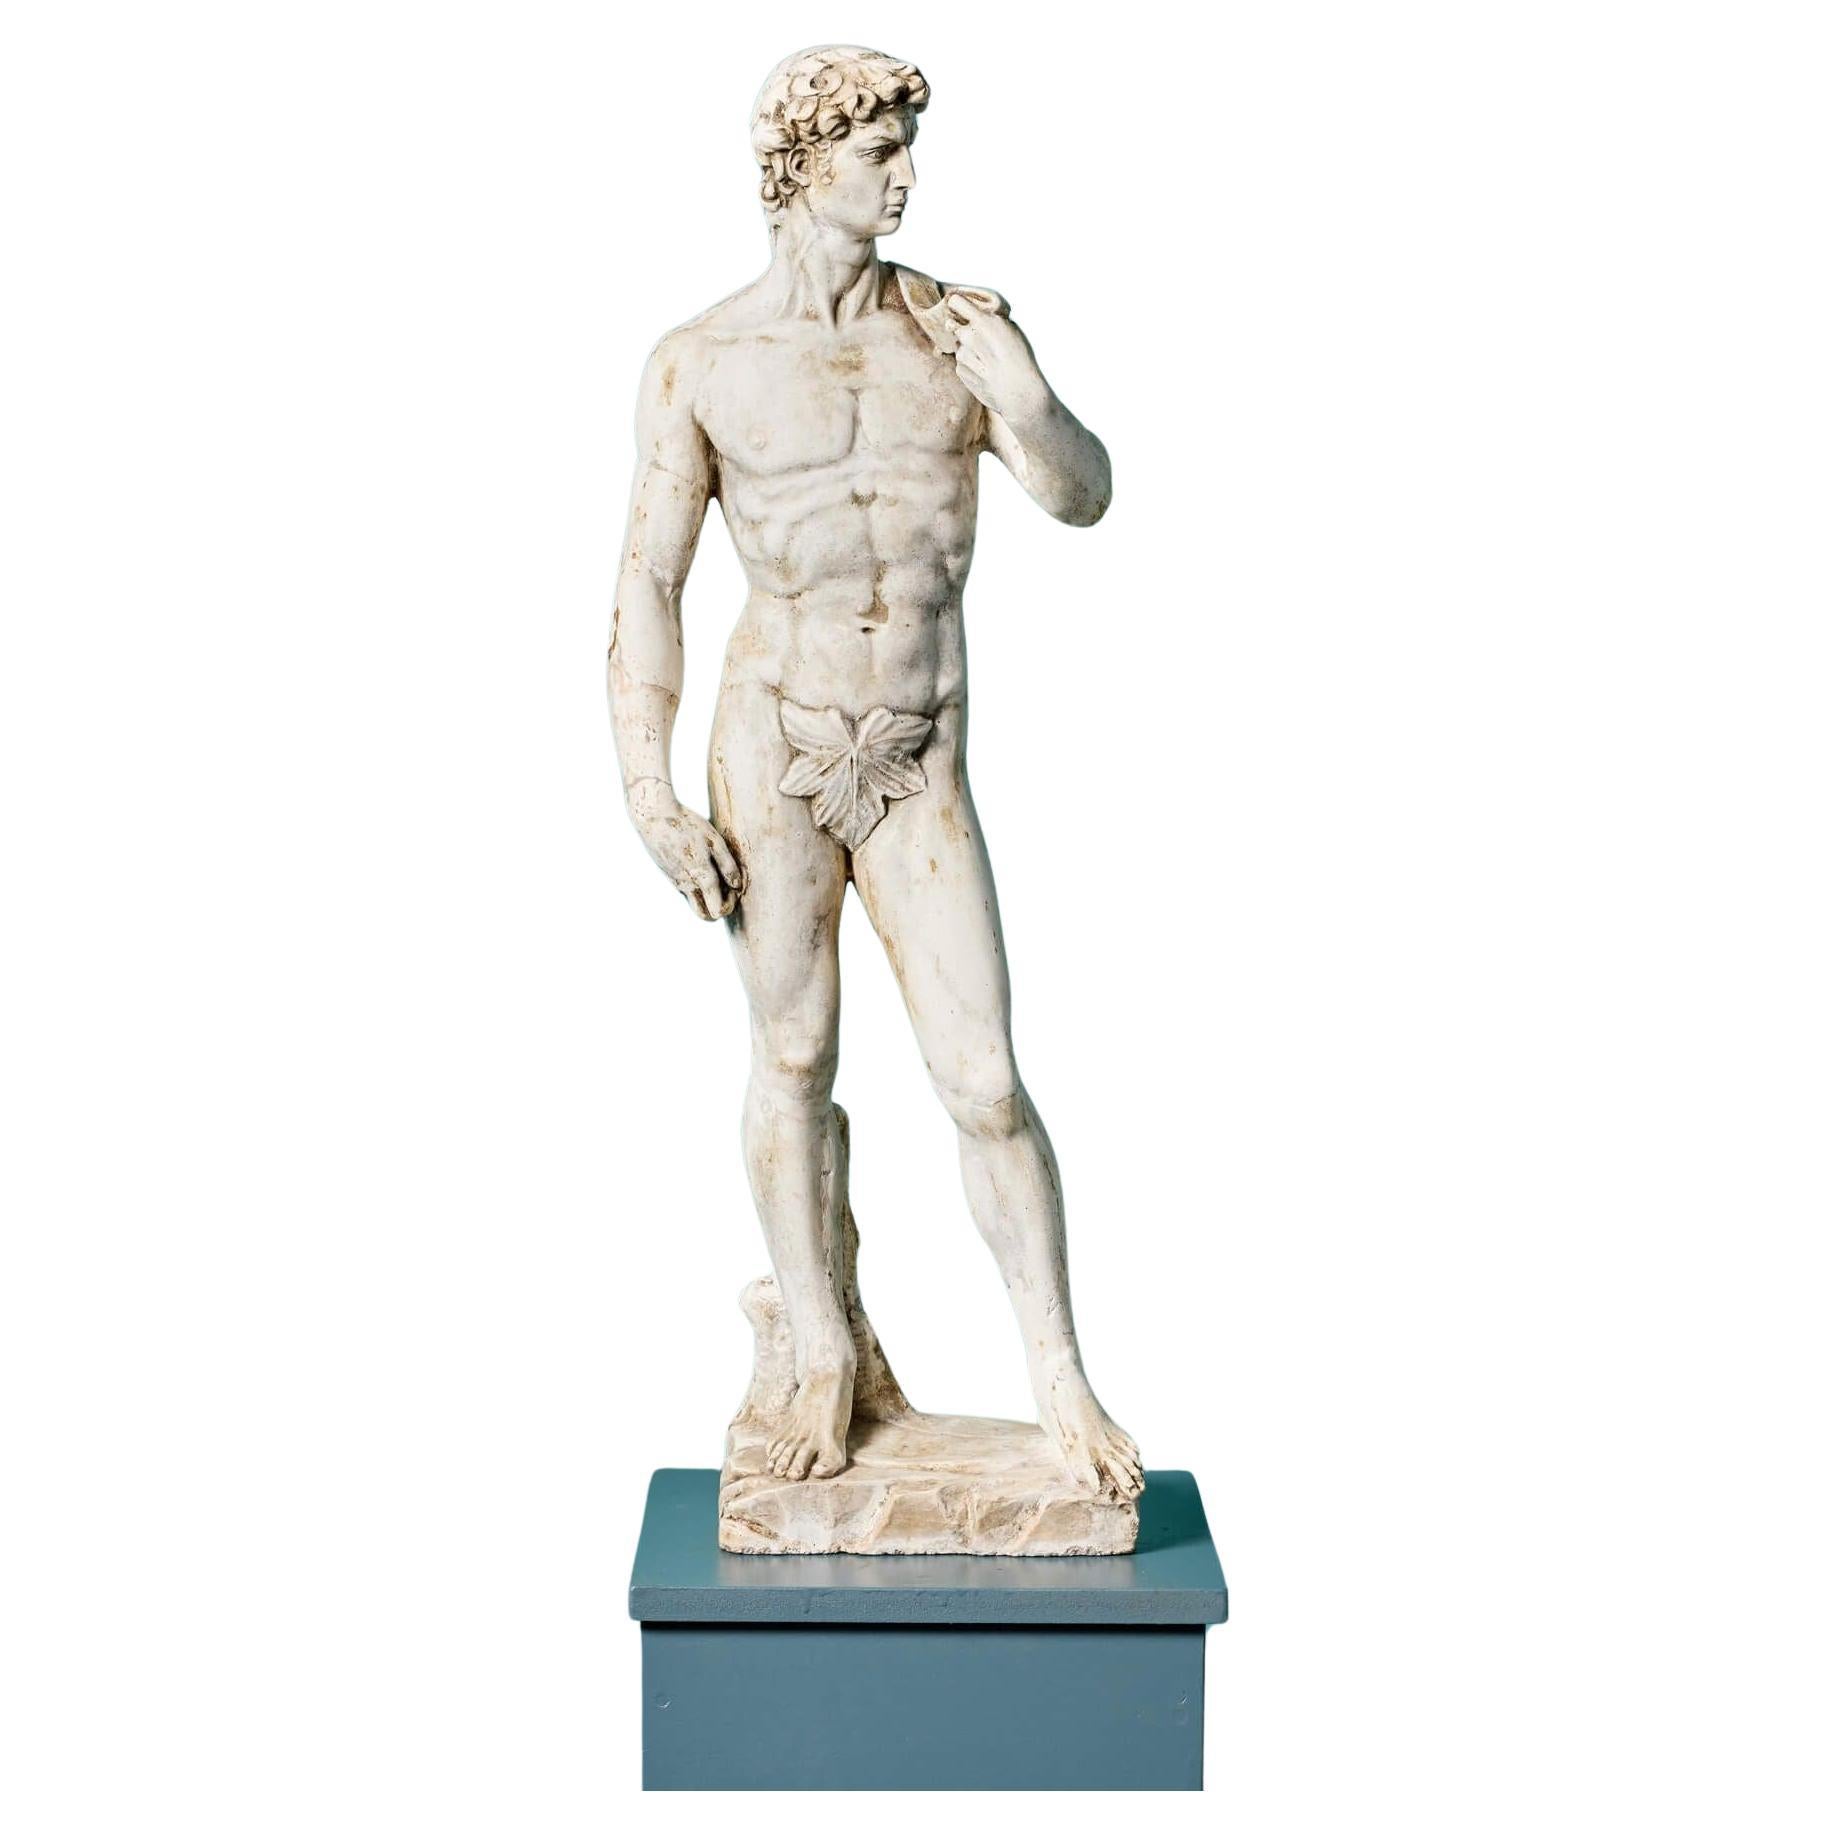 Michelangelo's David, a Victorian Plaster Statue, After The Antique